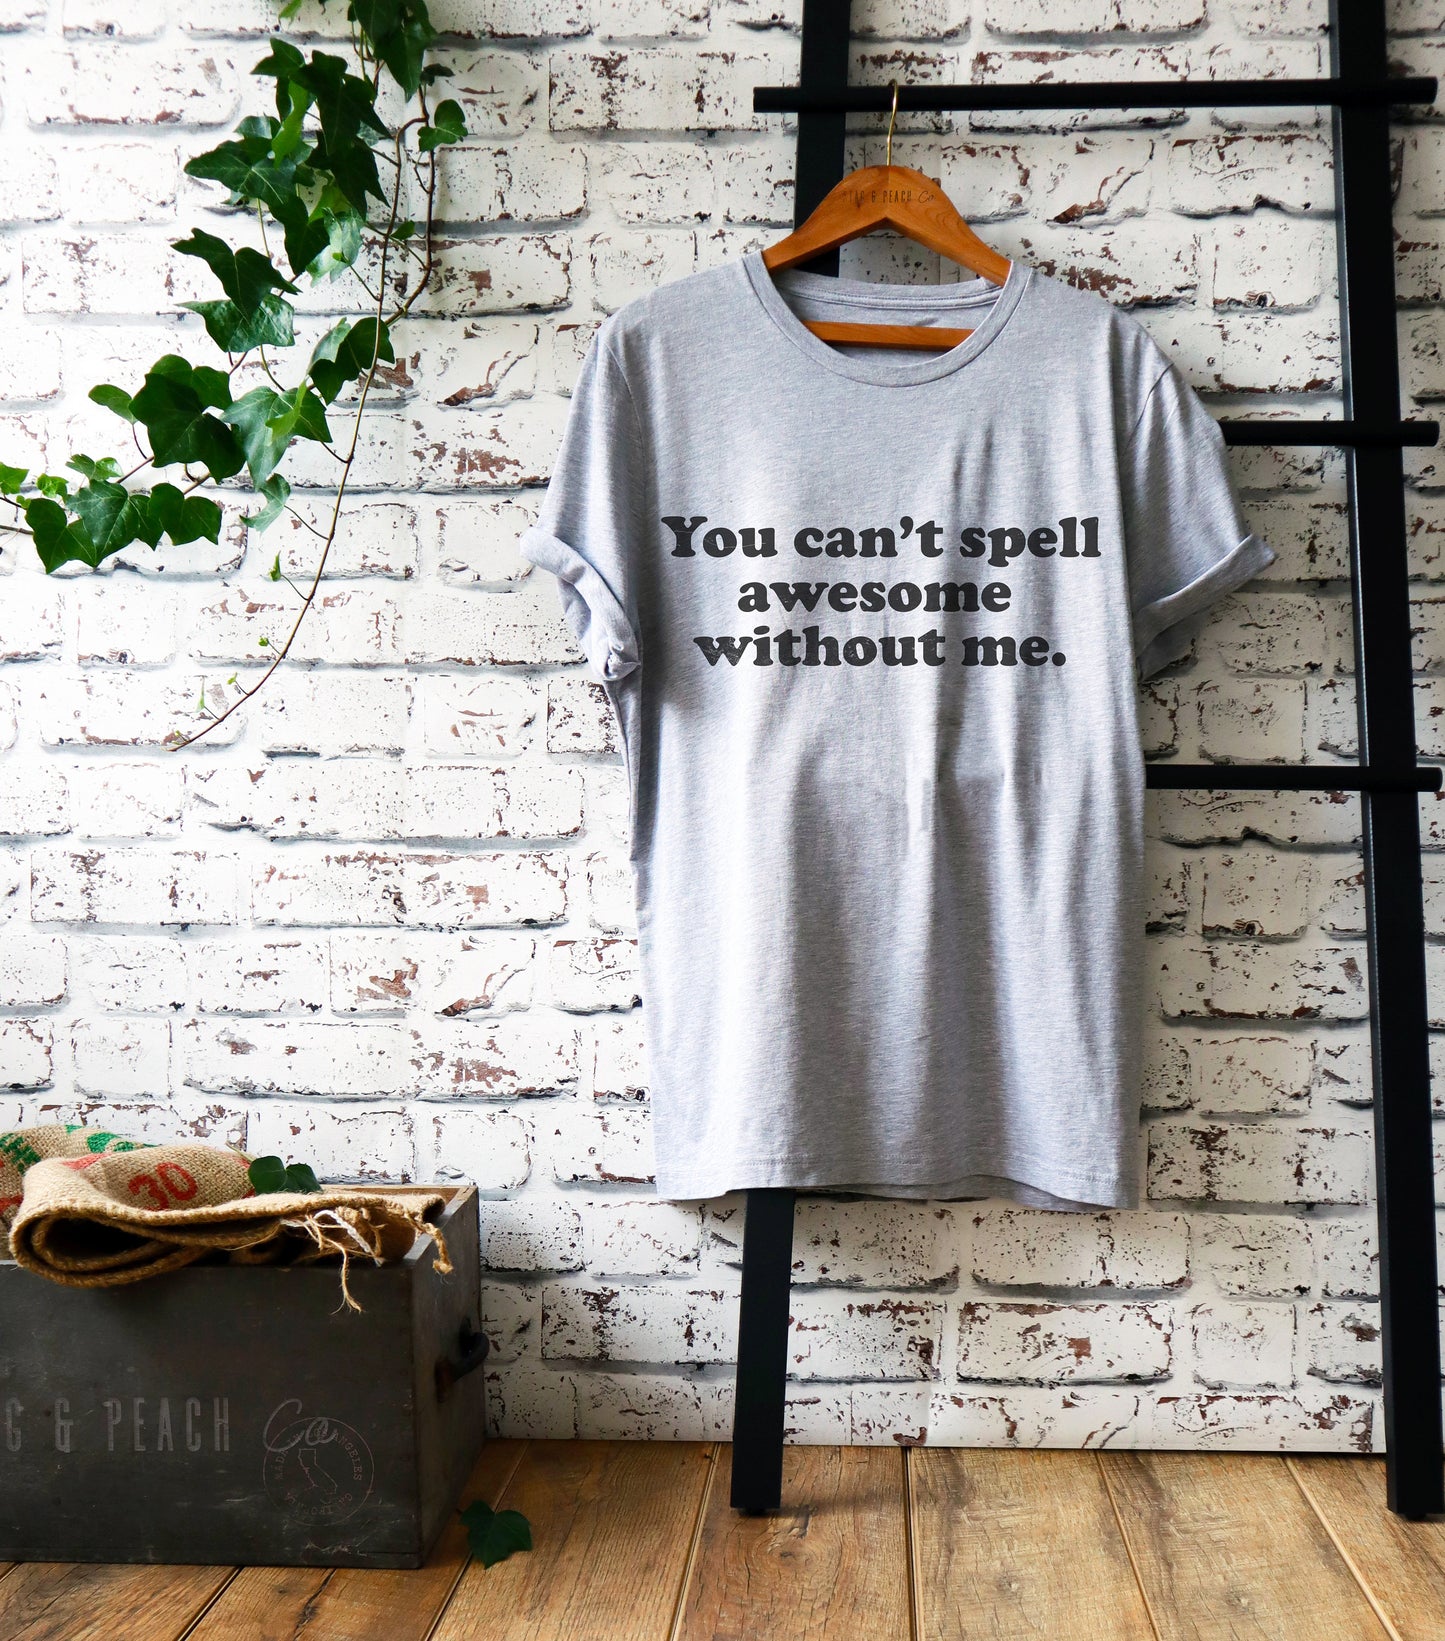 You Can’t Spell Awesome Without Me Unisex Shirt - Awesome Shirt, Awesome Gift, Funny Shirt, Funny Gift, Sarcasm Shirt, Confidence Shirt